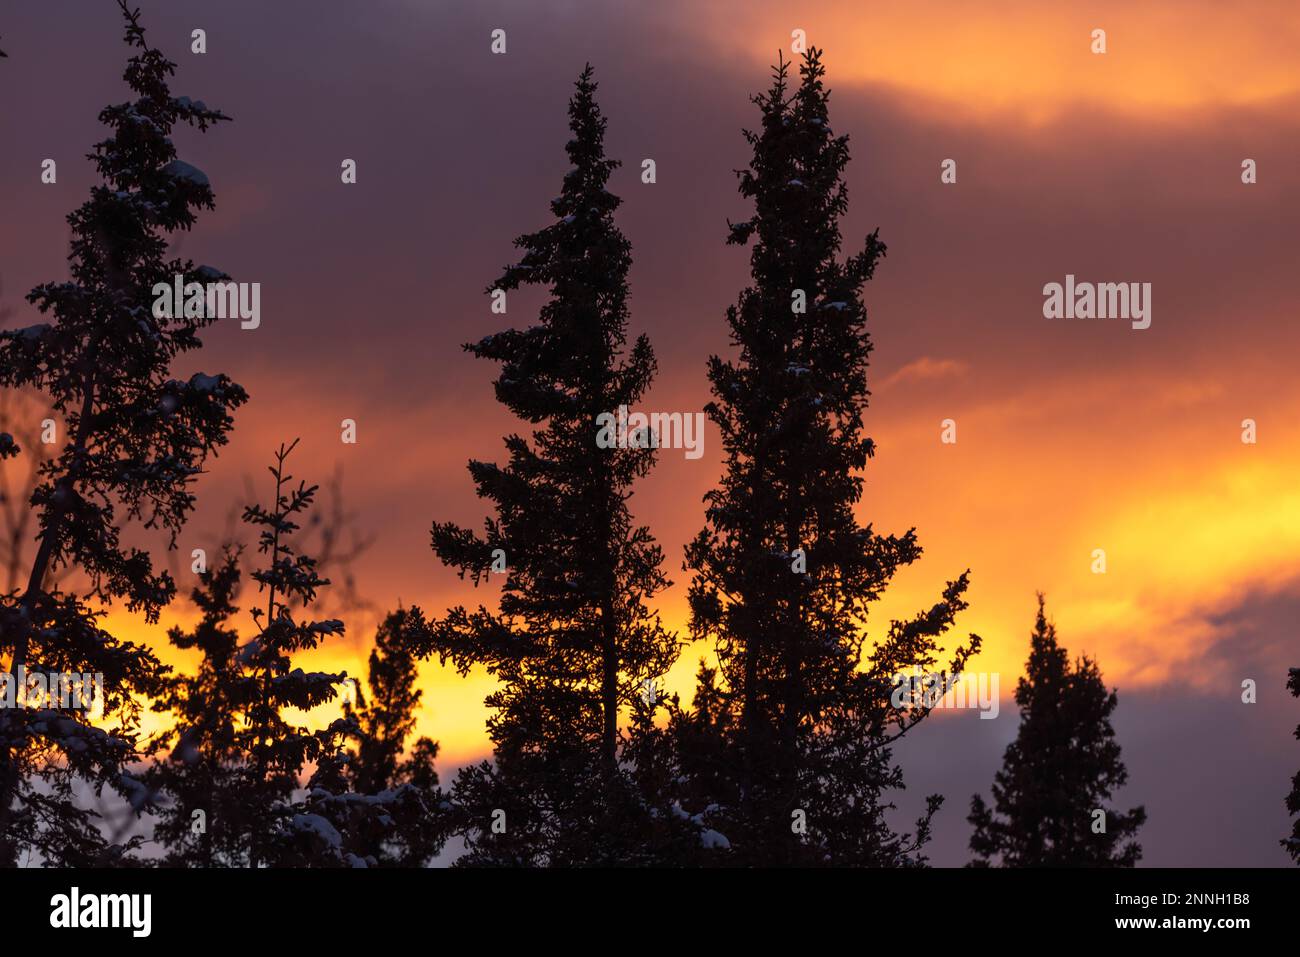 Fire skies with sun setting behind boreal forest spruce trees in northern Canada near the arctic. Incredible landscape views. Stock Photo